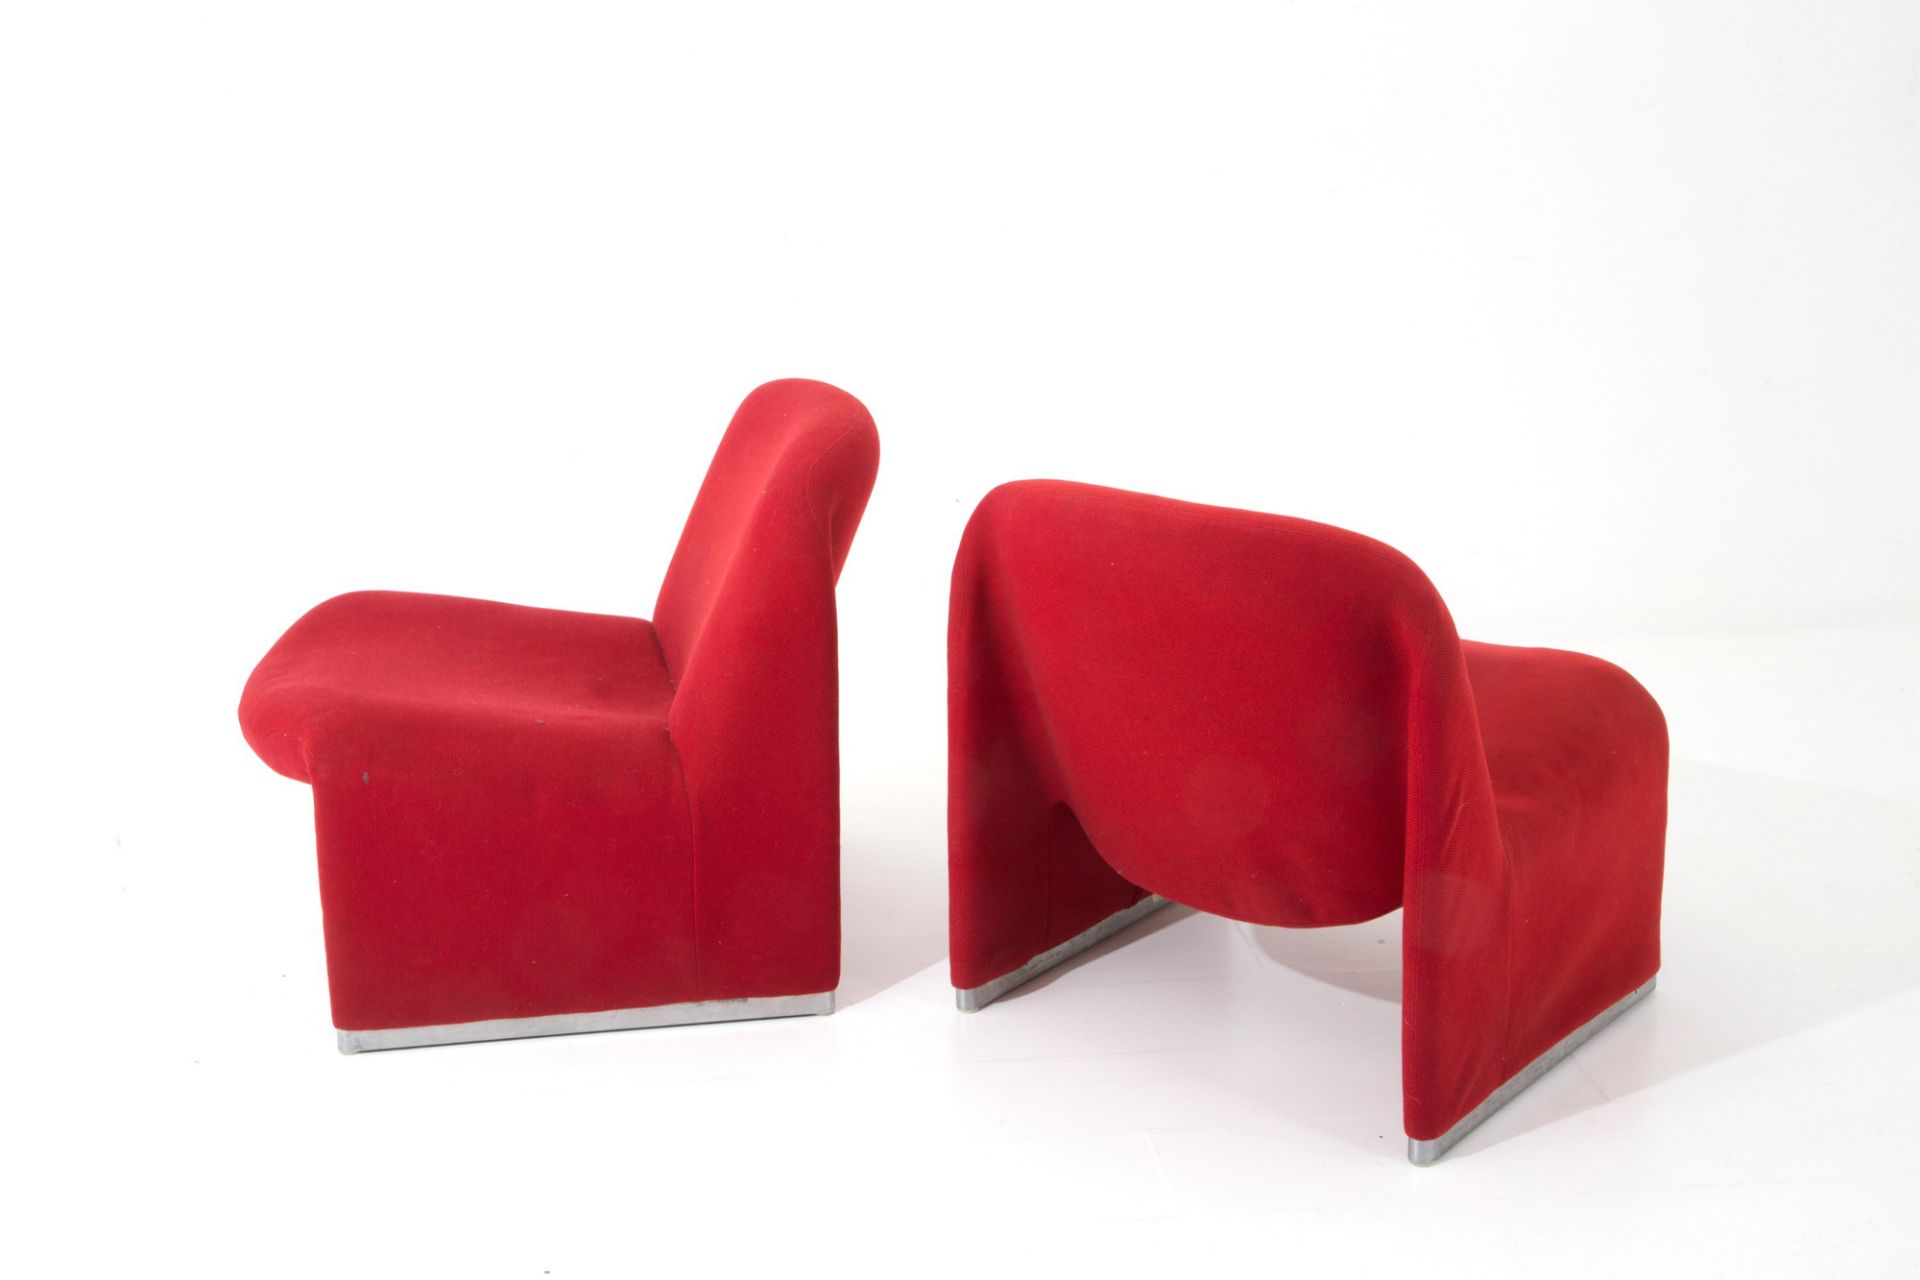 GIANCARLO PIRETTI. Pair of Alky armchairs for ANONIMA CASTELLI - Image 4 of 4